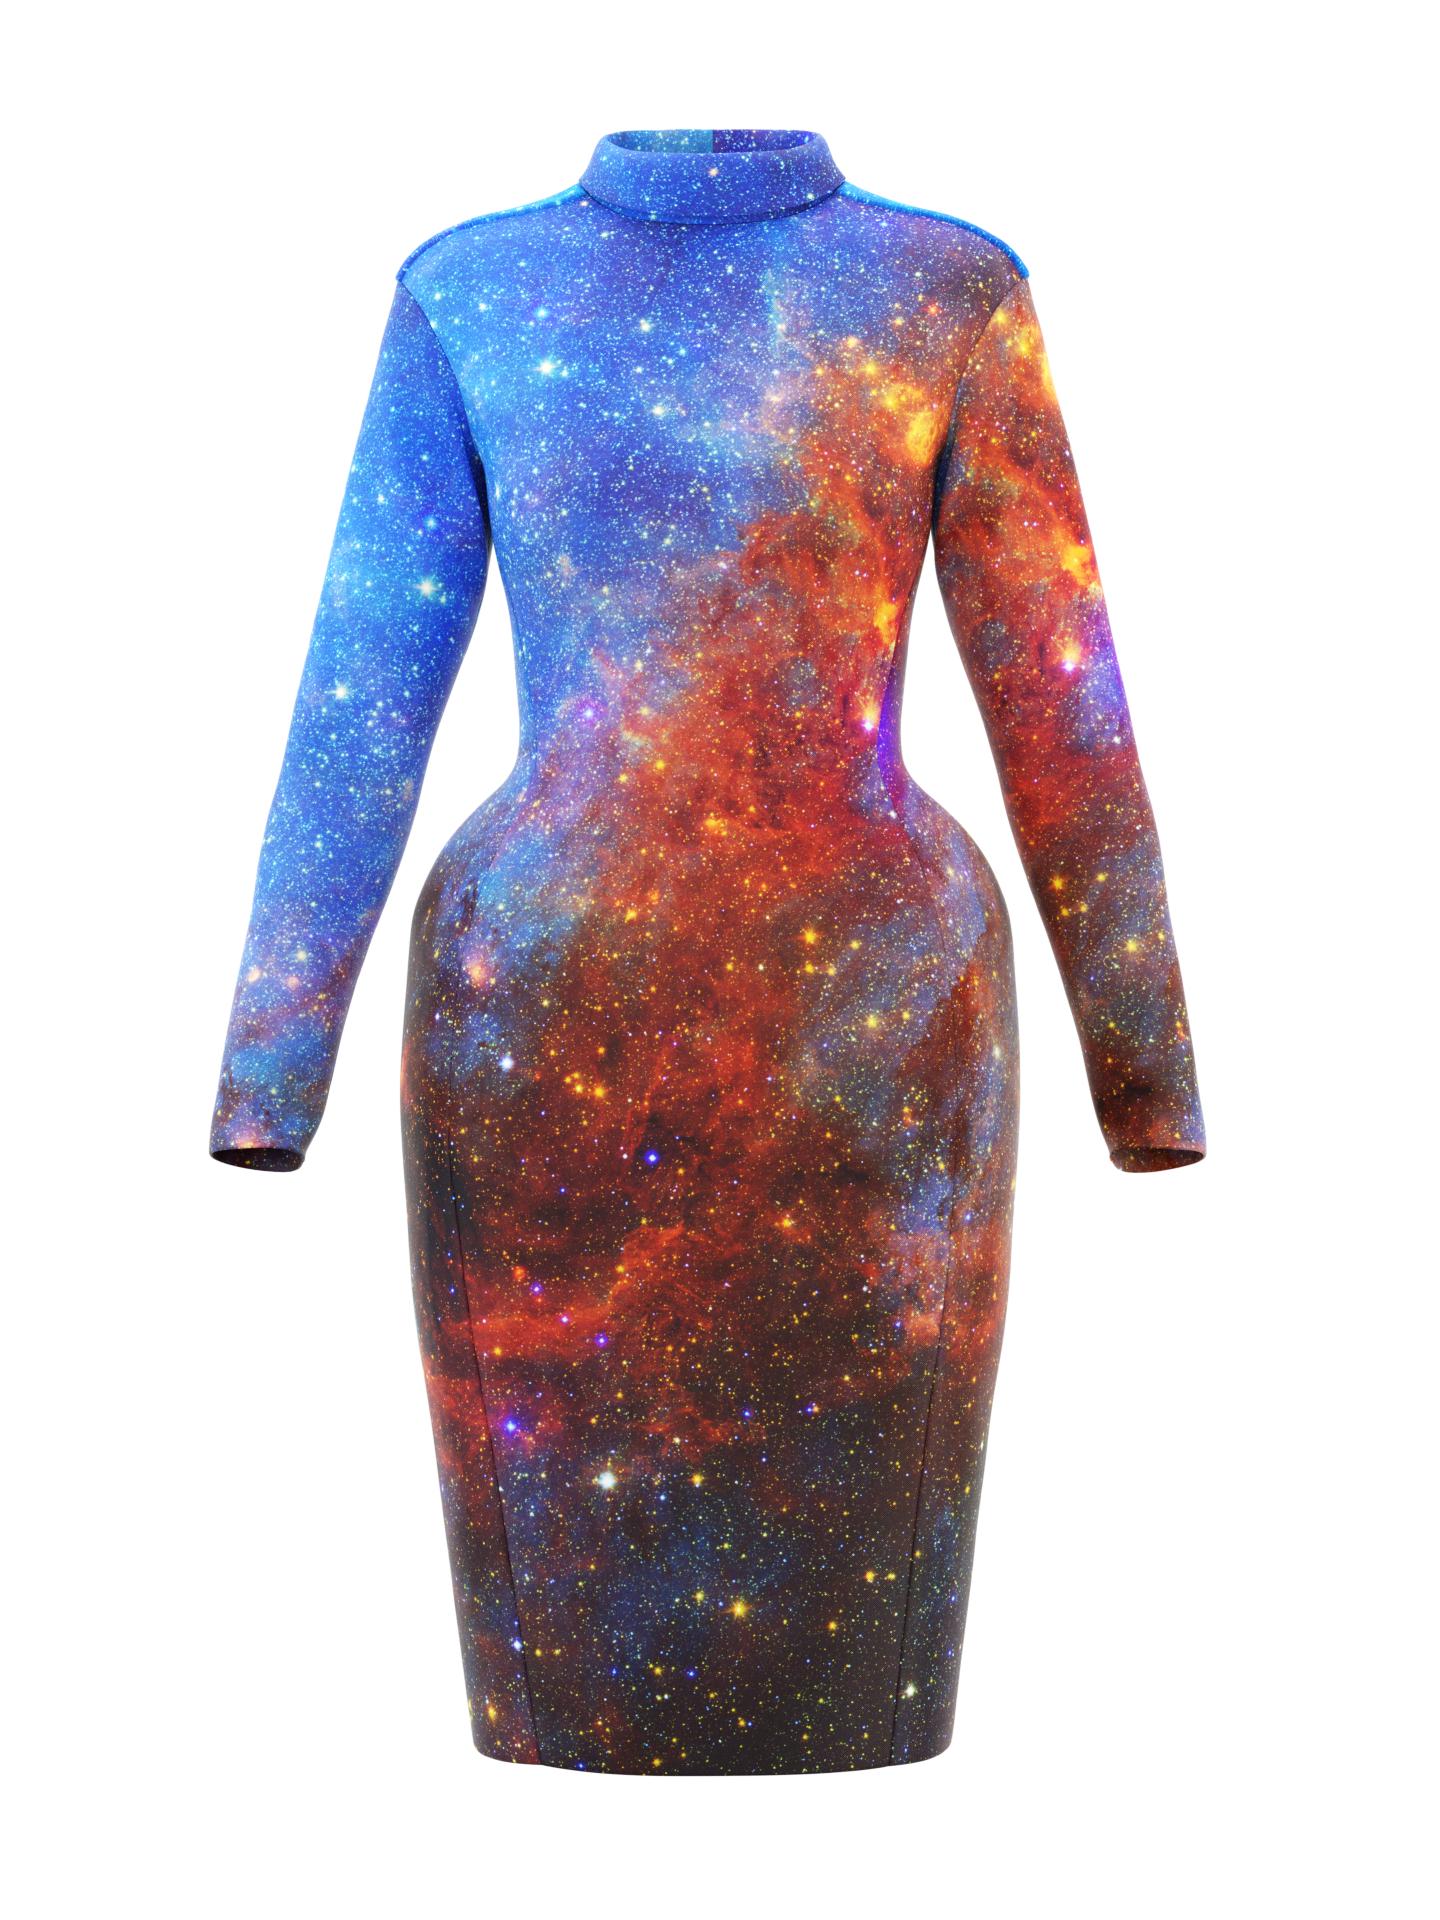 Space Dress - Telescope by DRESSX UNIVERSE INSPIRED BY NASA